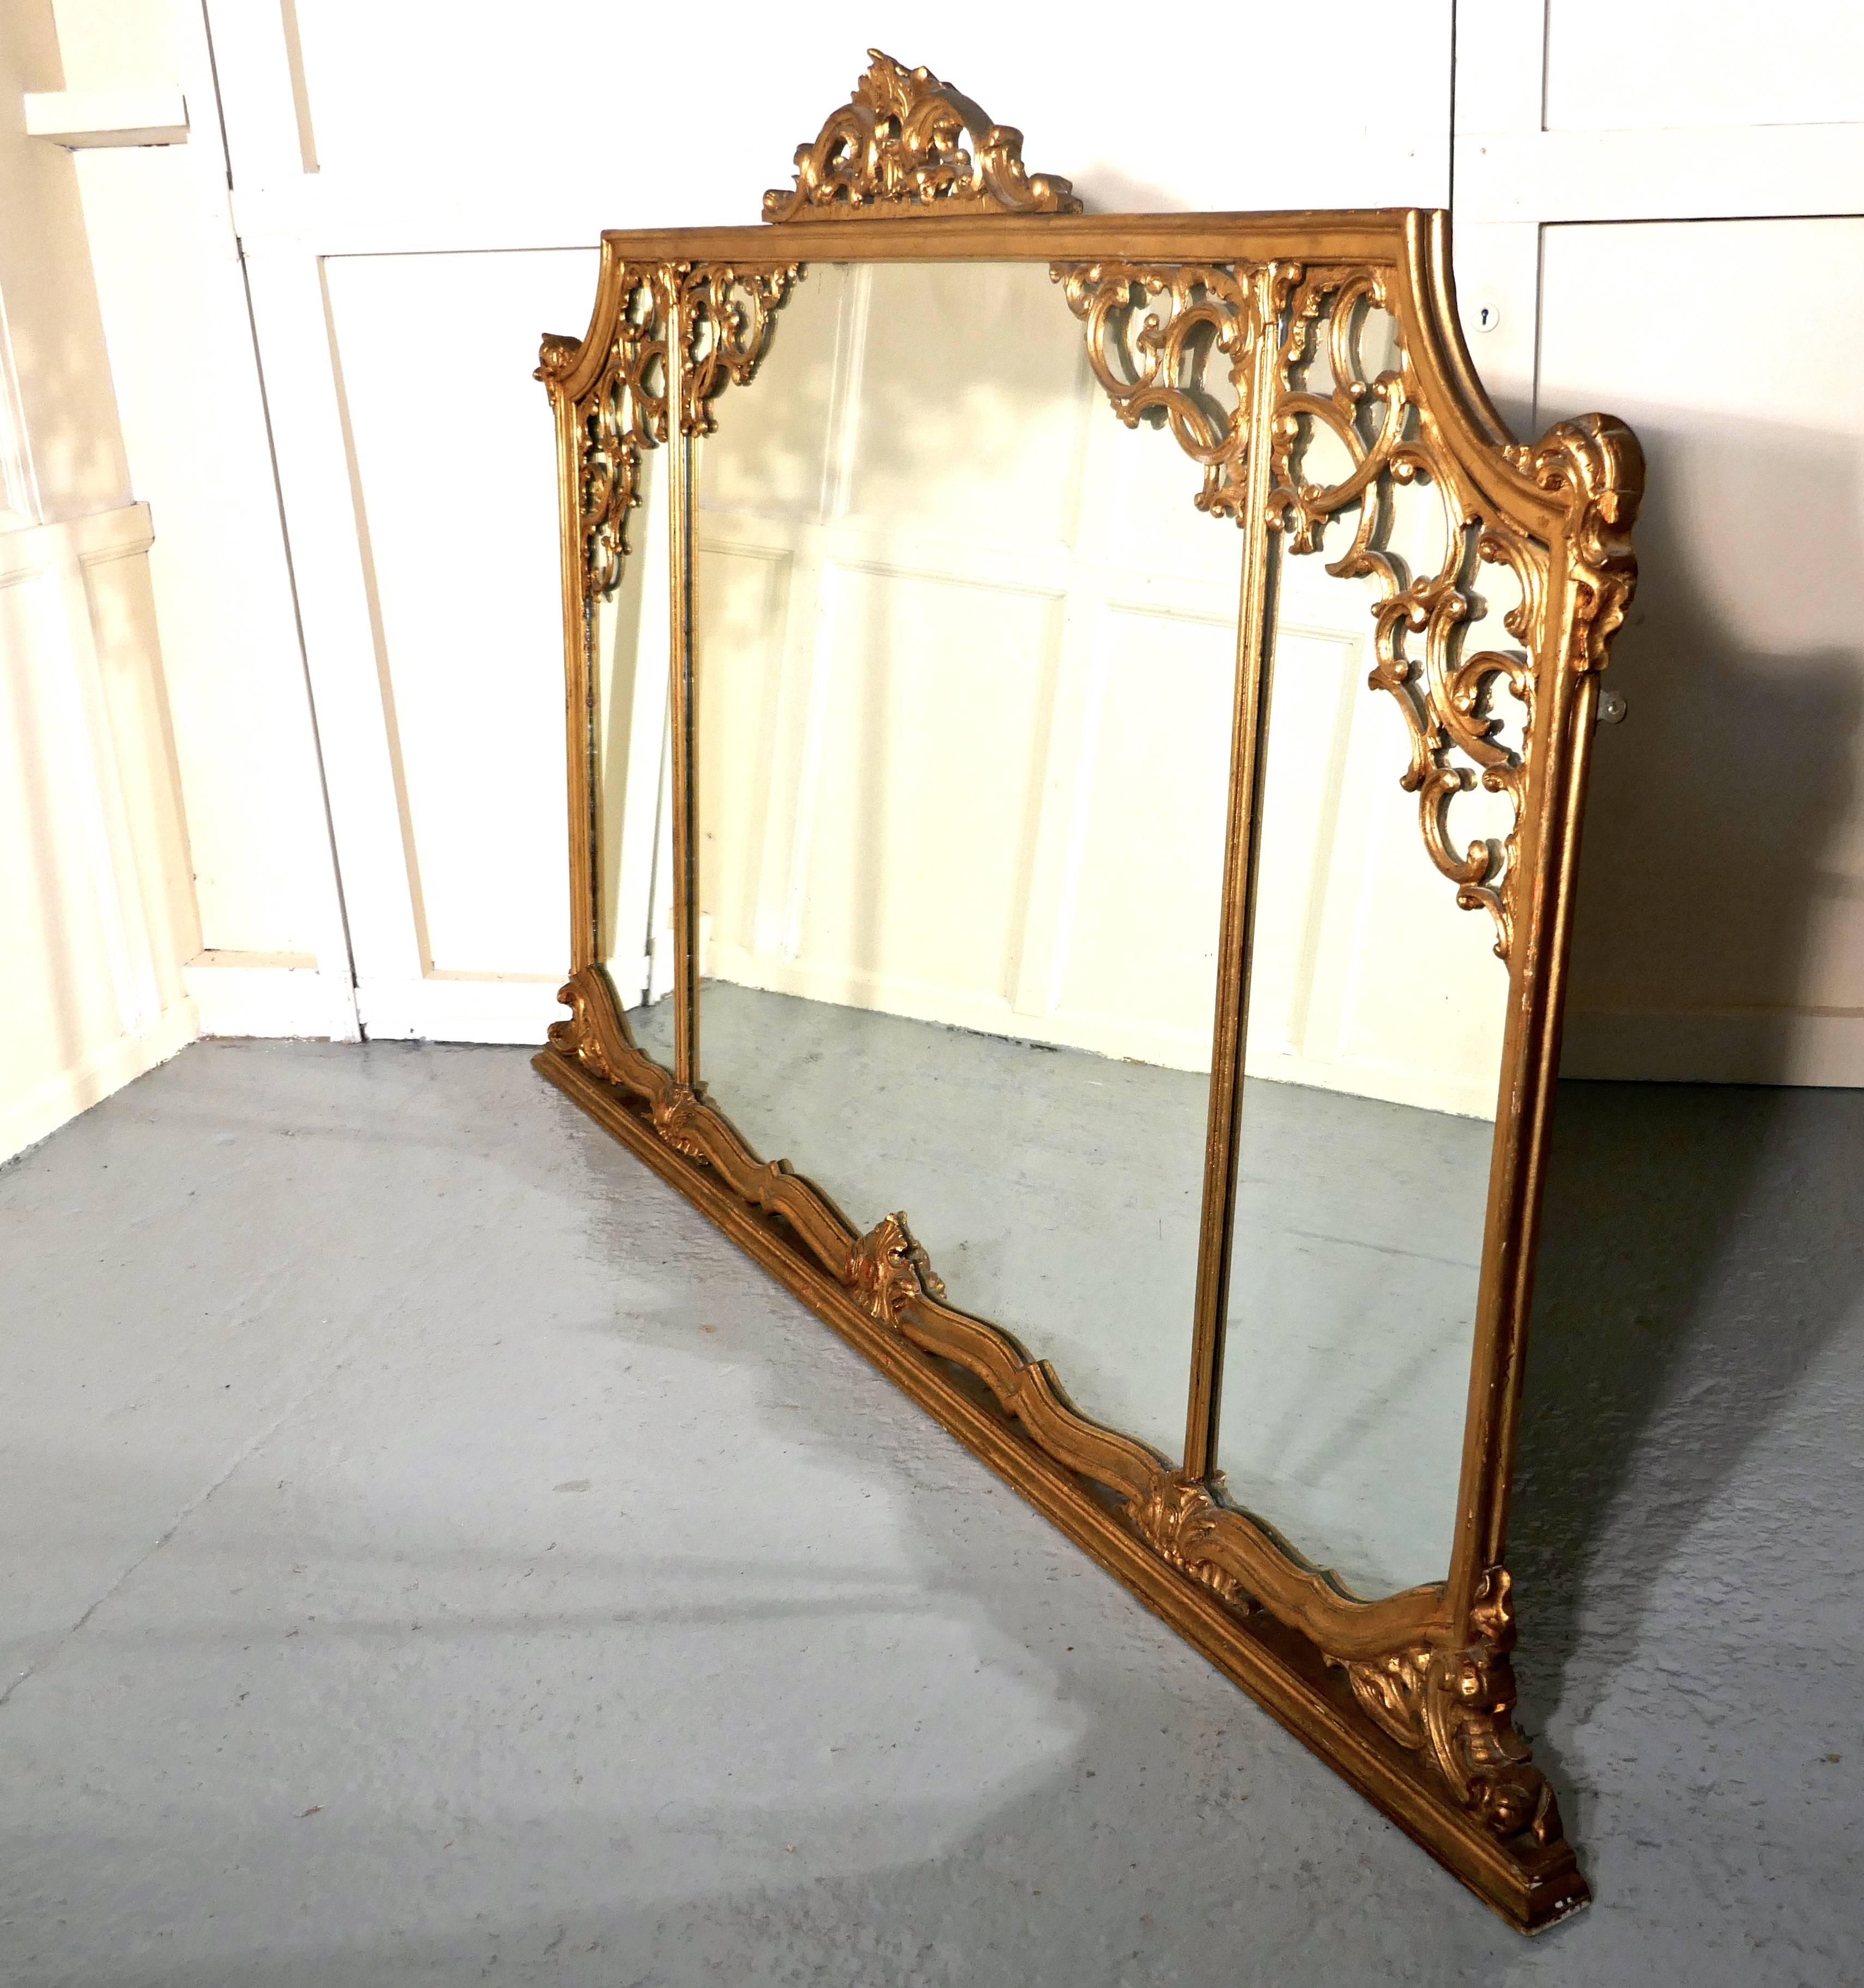 Very large 19th century Adams style gilt over mantel wall mirror

The mirror has a beautiful Rococo gold frame with three mirrors, at the top it is elaborately decorated with carved swags of leaves and Ribbons and a crest at the centre. The base